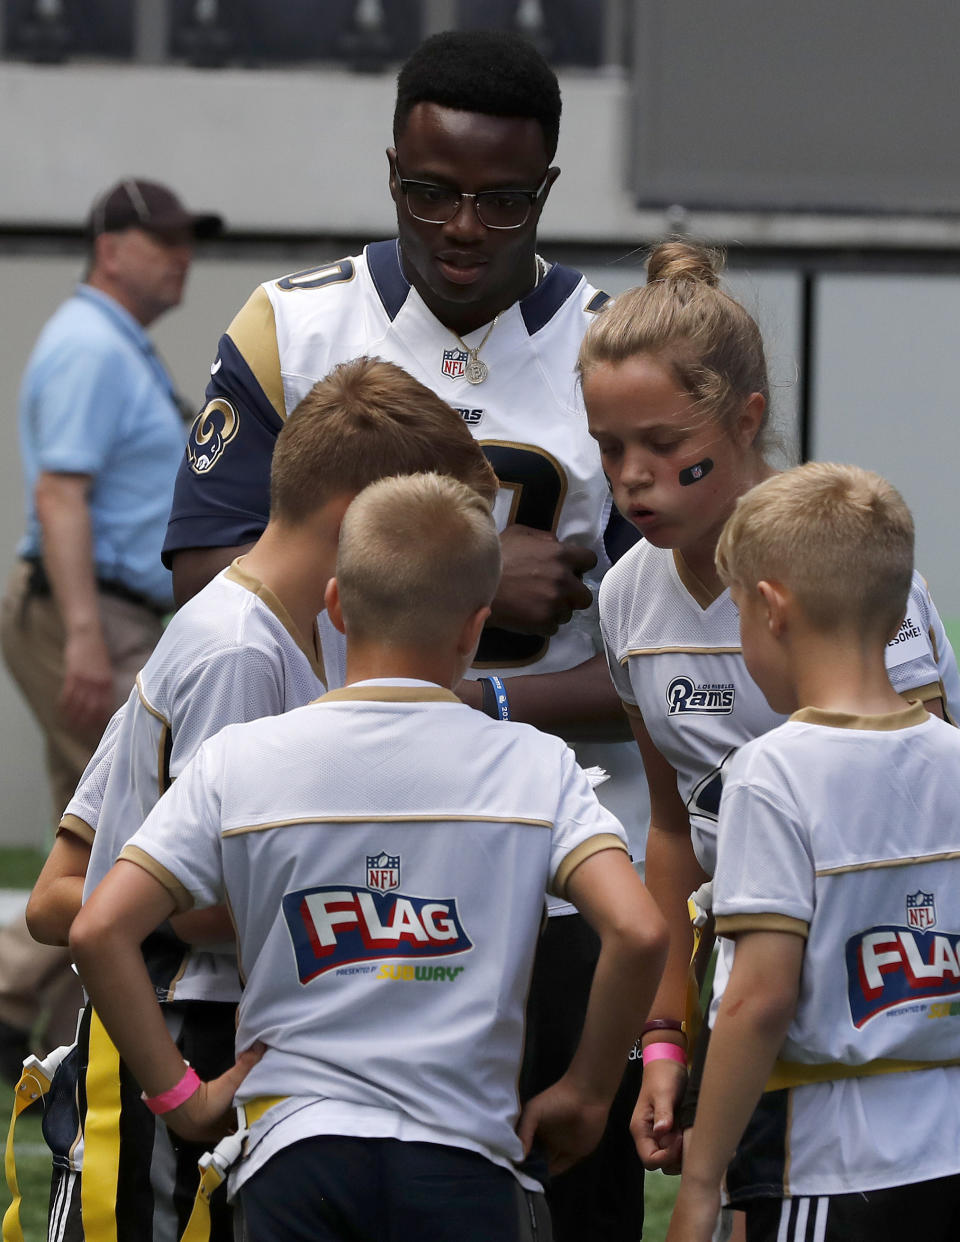 NFL player Samson Ebukam of the Los Angeles Rams coaches a young team during the final tournament for the UK's NFL Flag Championship, featuring qualifying teams from around the country, at the Tottenham Hotspur Stadium in London, Wednesday, July 3, 2019. The new stadium will host its first two NFL London Games later this year when the Chicago Bears face the Oakland Raiders and the Carolina Panthers take on the Tampa Bay Buccaneers. (AP Photo/Frank Augstein)